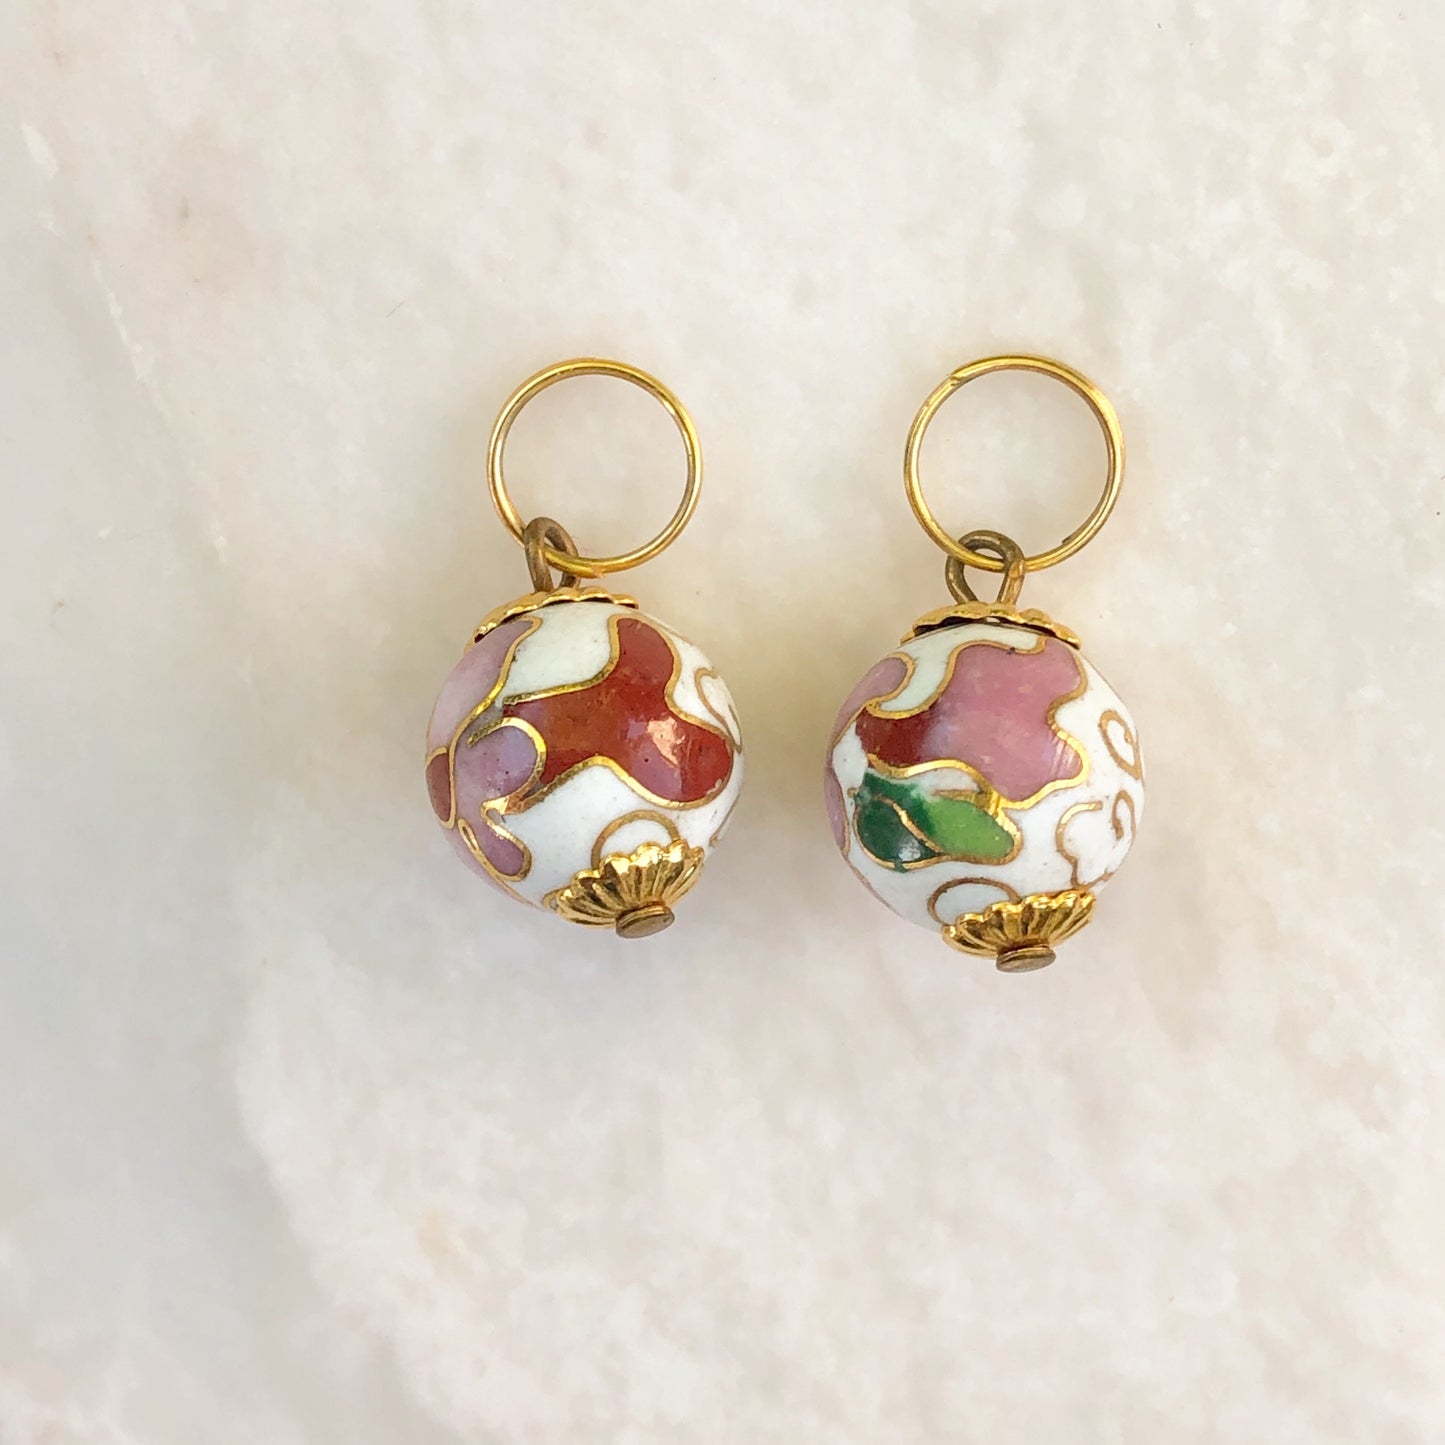 14KT Yellow Gold Cloisonne White + Red Floral Earring Charms, 14KT Yellow Gold Cloisonne White + Red Floral Earring Charms - Legacy Saint Jewelry